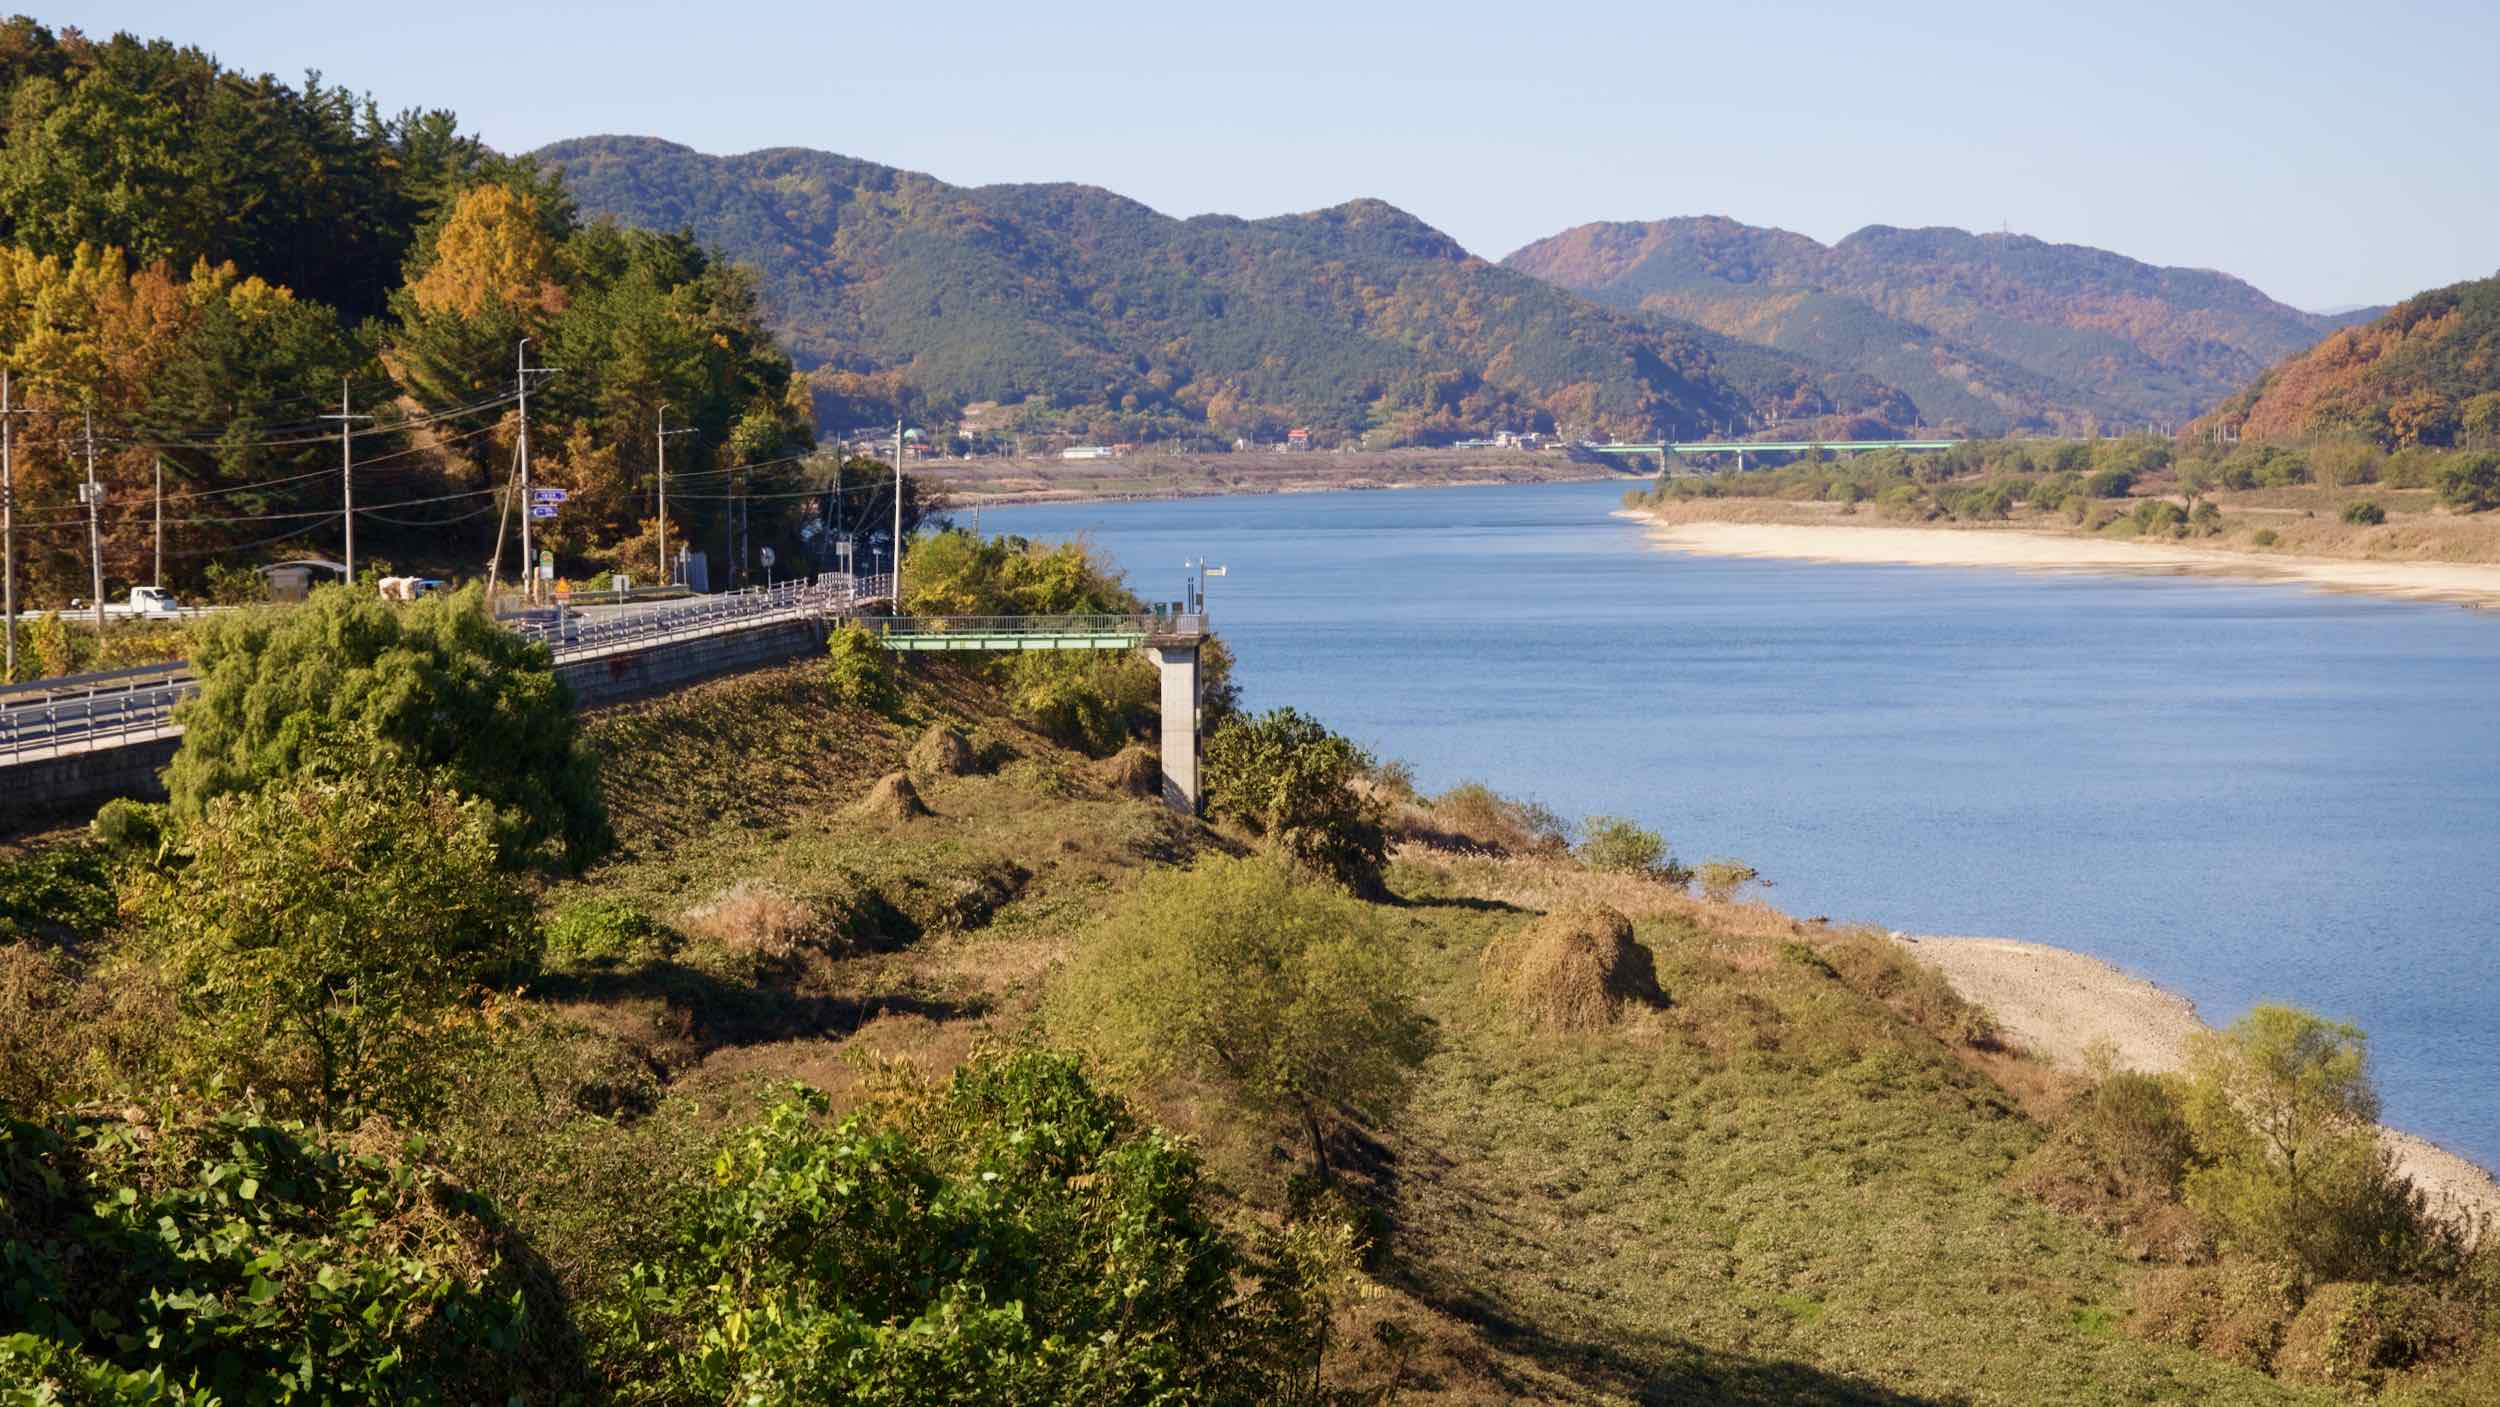 A picture of the Nakdonggang Bike Path and Nakdong River in Hapcheon County, South Korea.